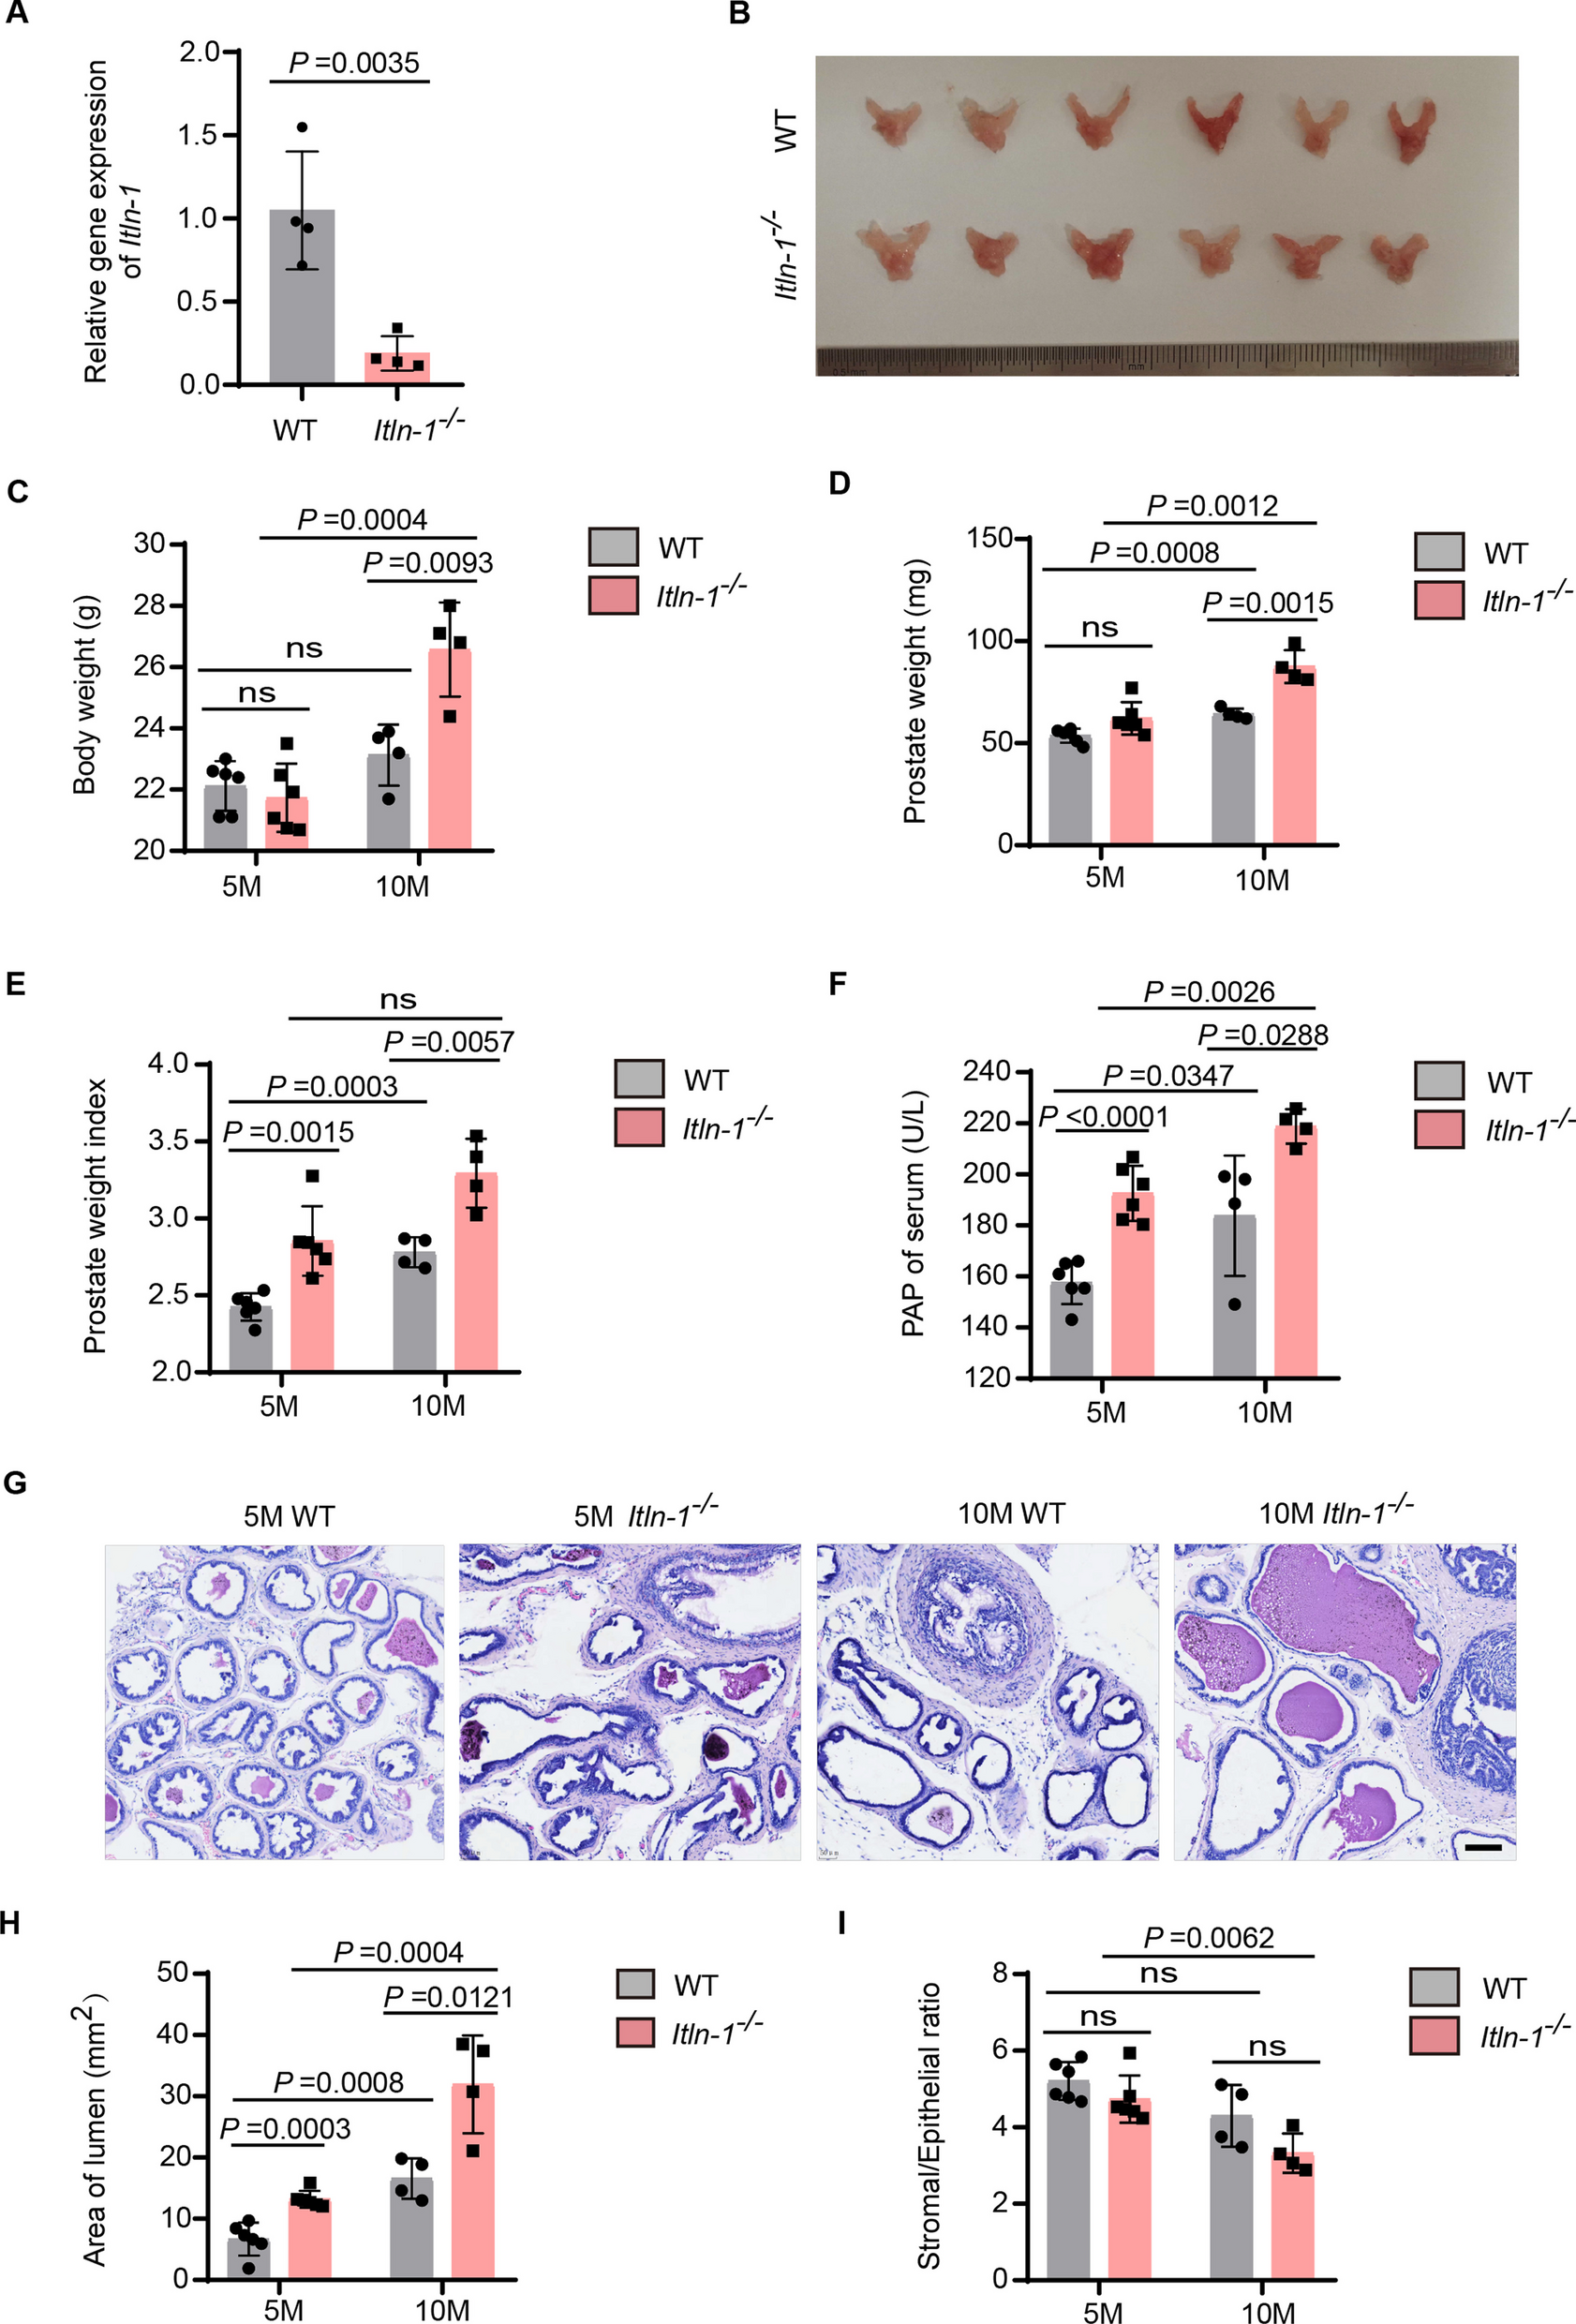 Omentin-1 inhibits the development of benign prostatic hyperplasia by attenuating local inflammation